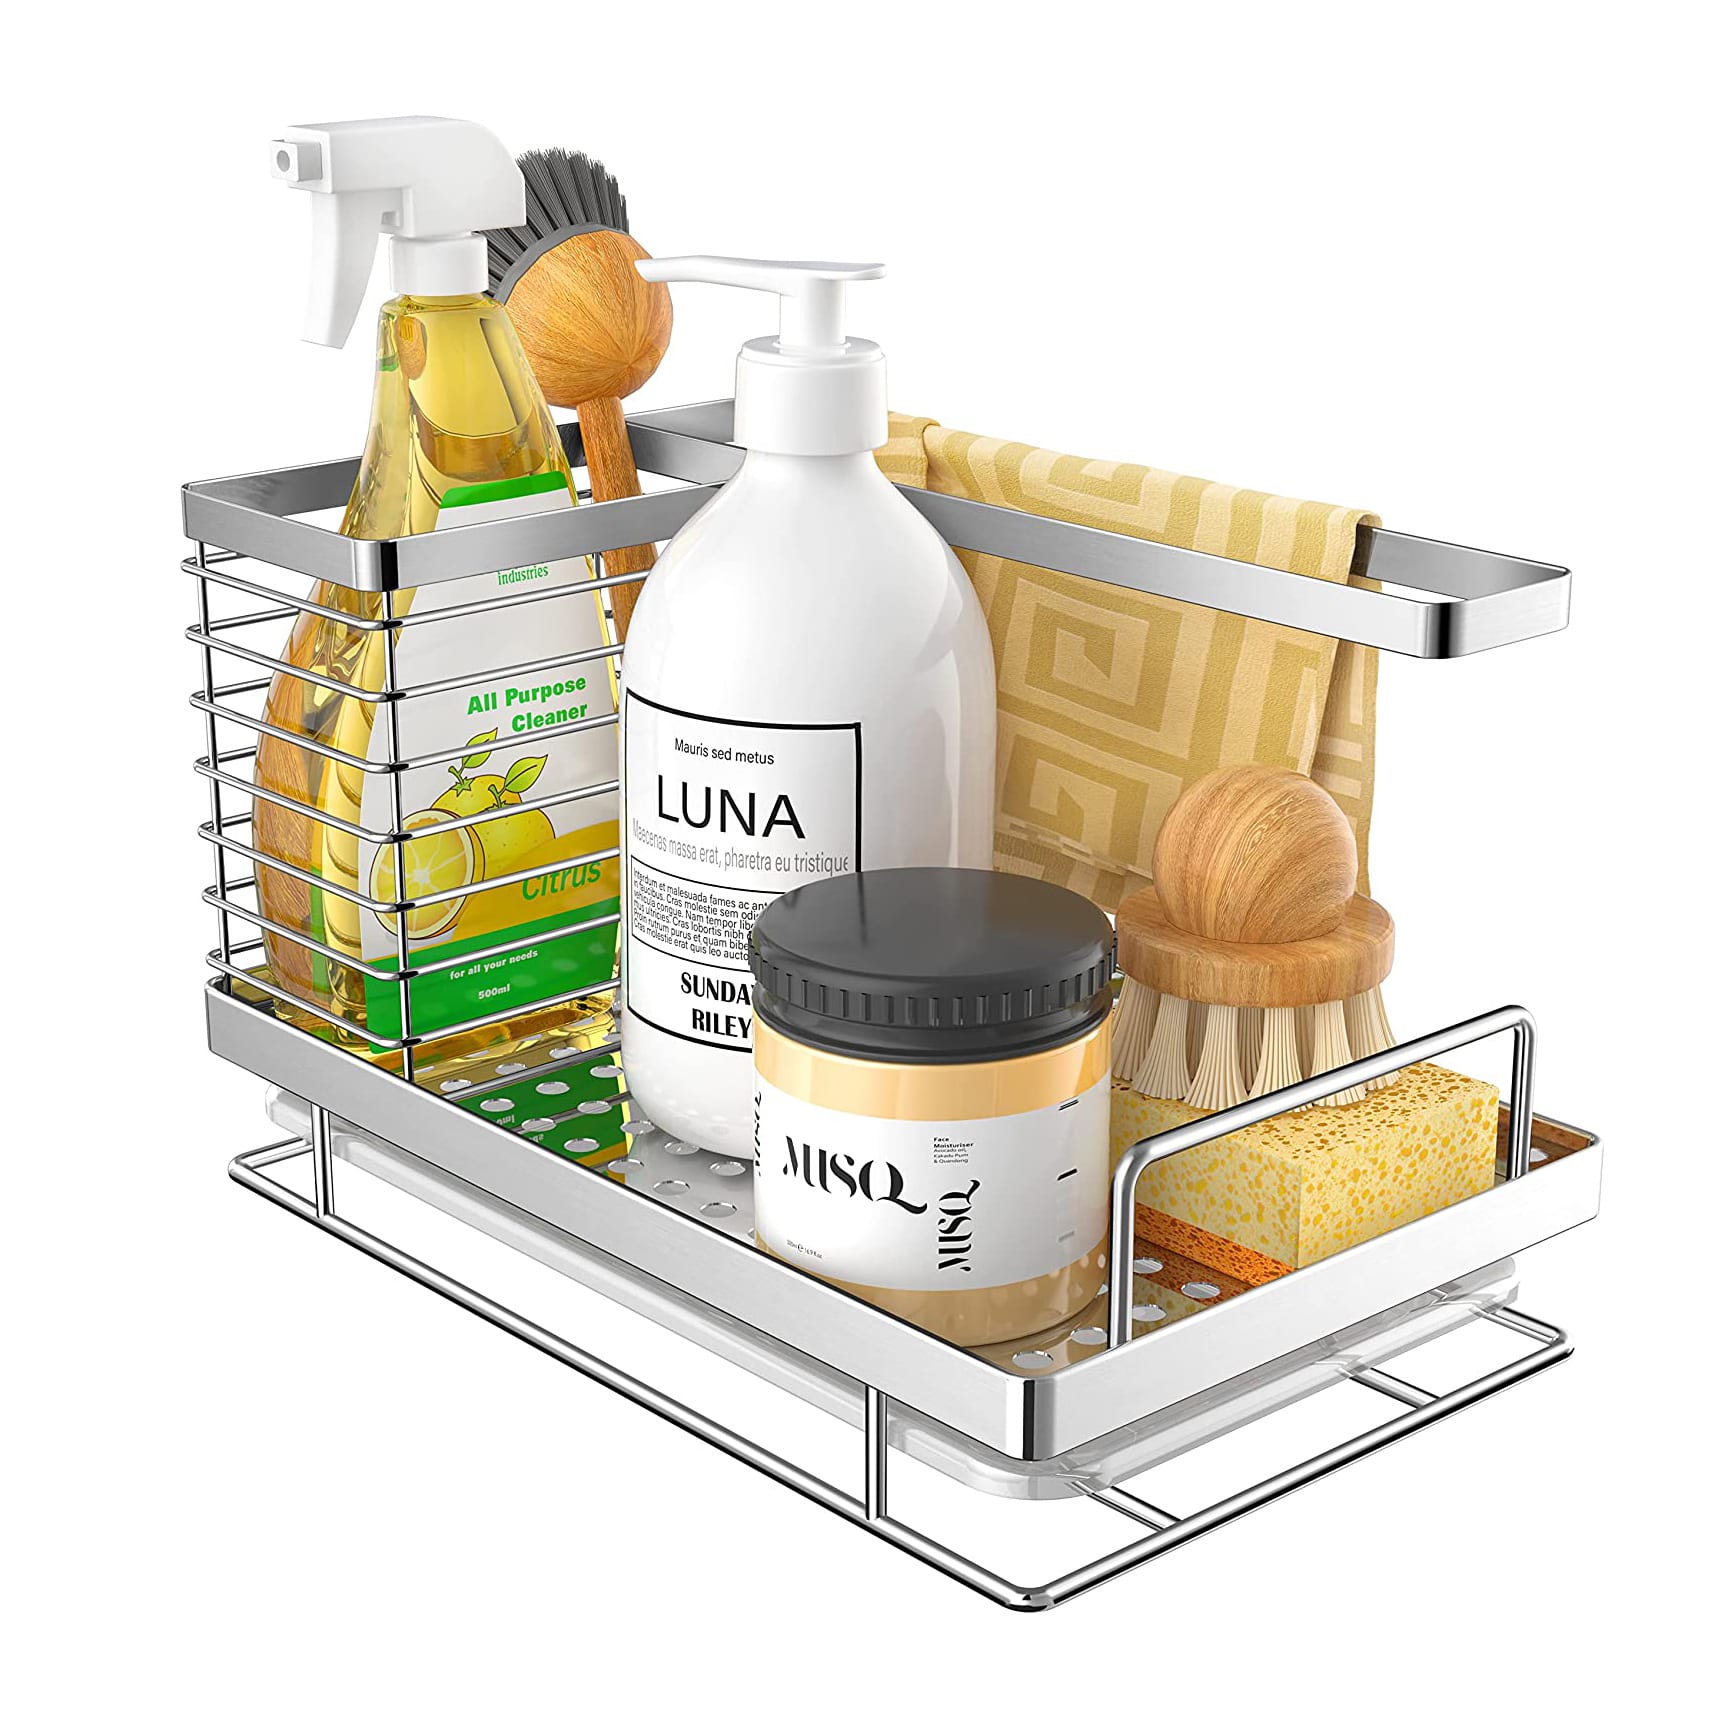 SpaceAid® Quick-Dry Kitchen and Bathroom Sink Caddy Organizer, the Soa